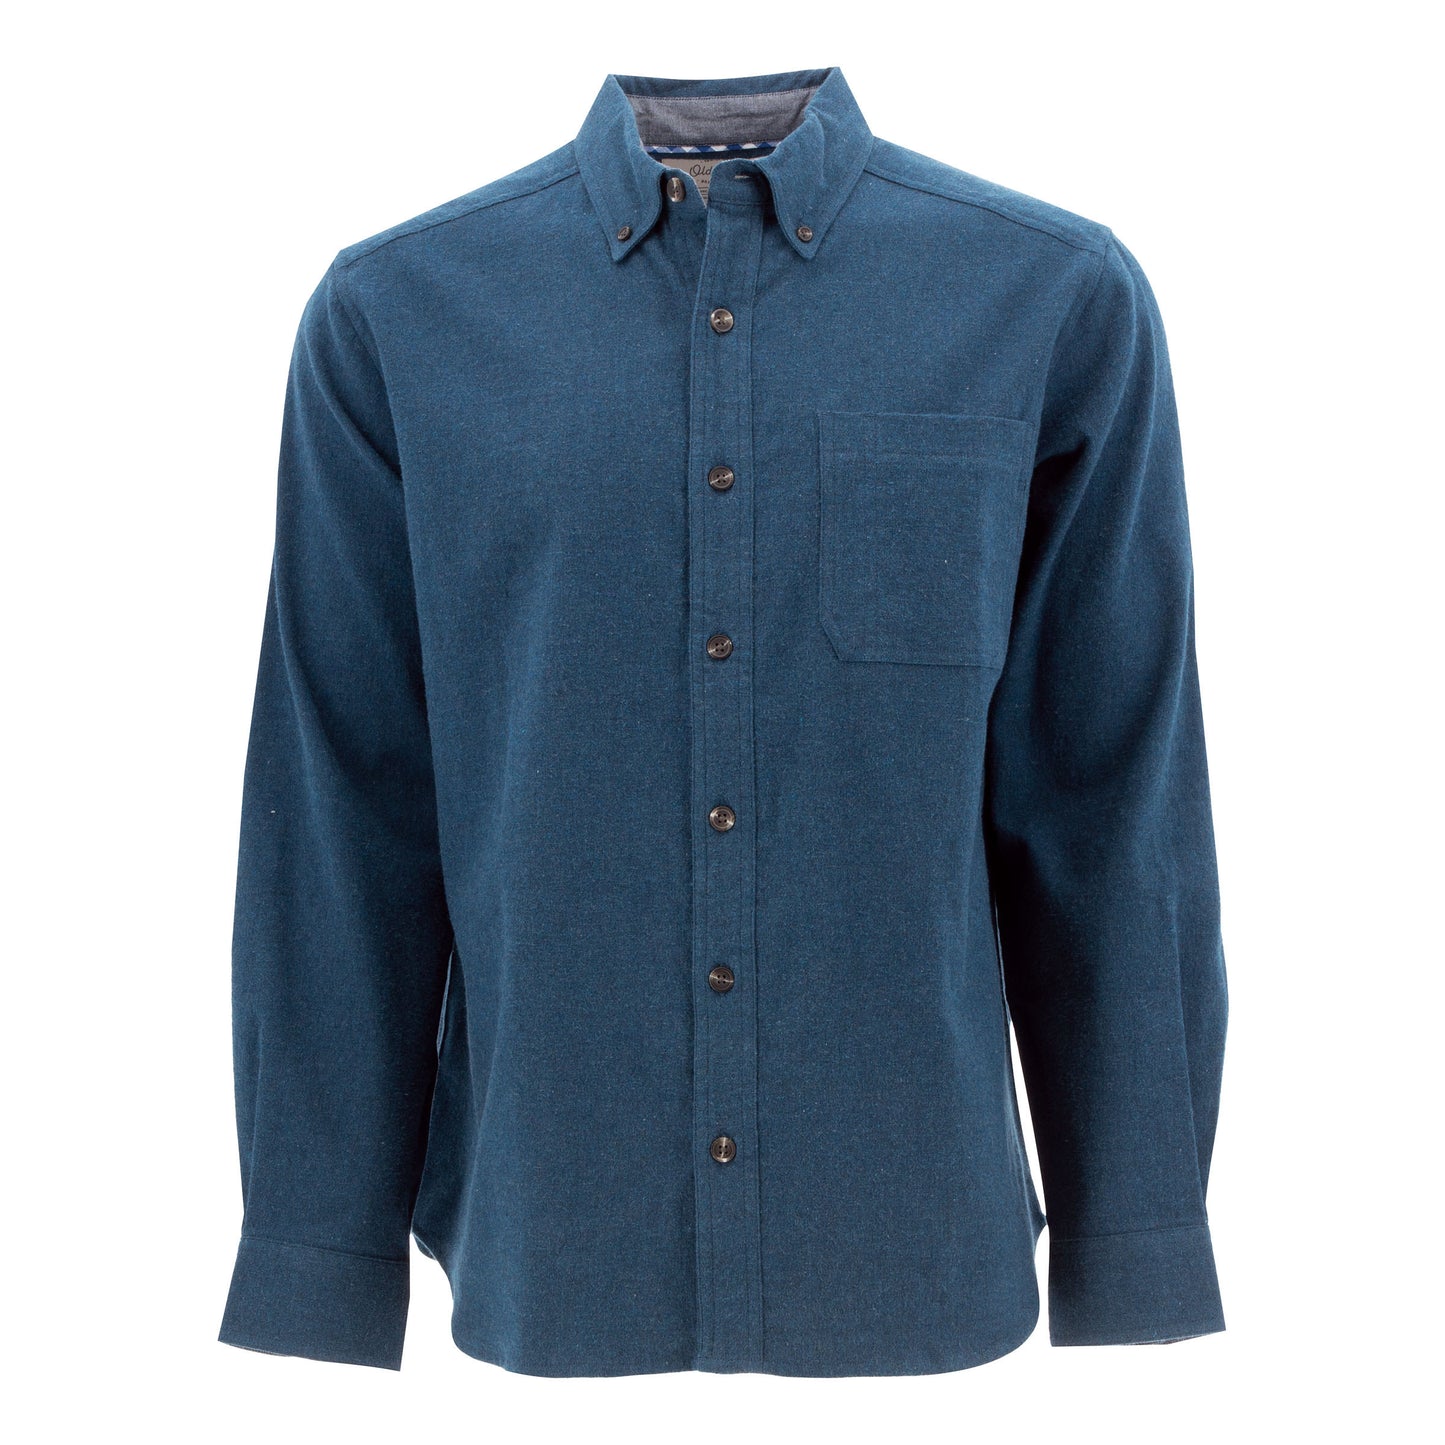 OR Sequoia L/S Shirt